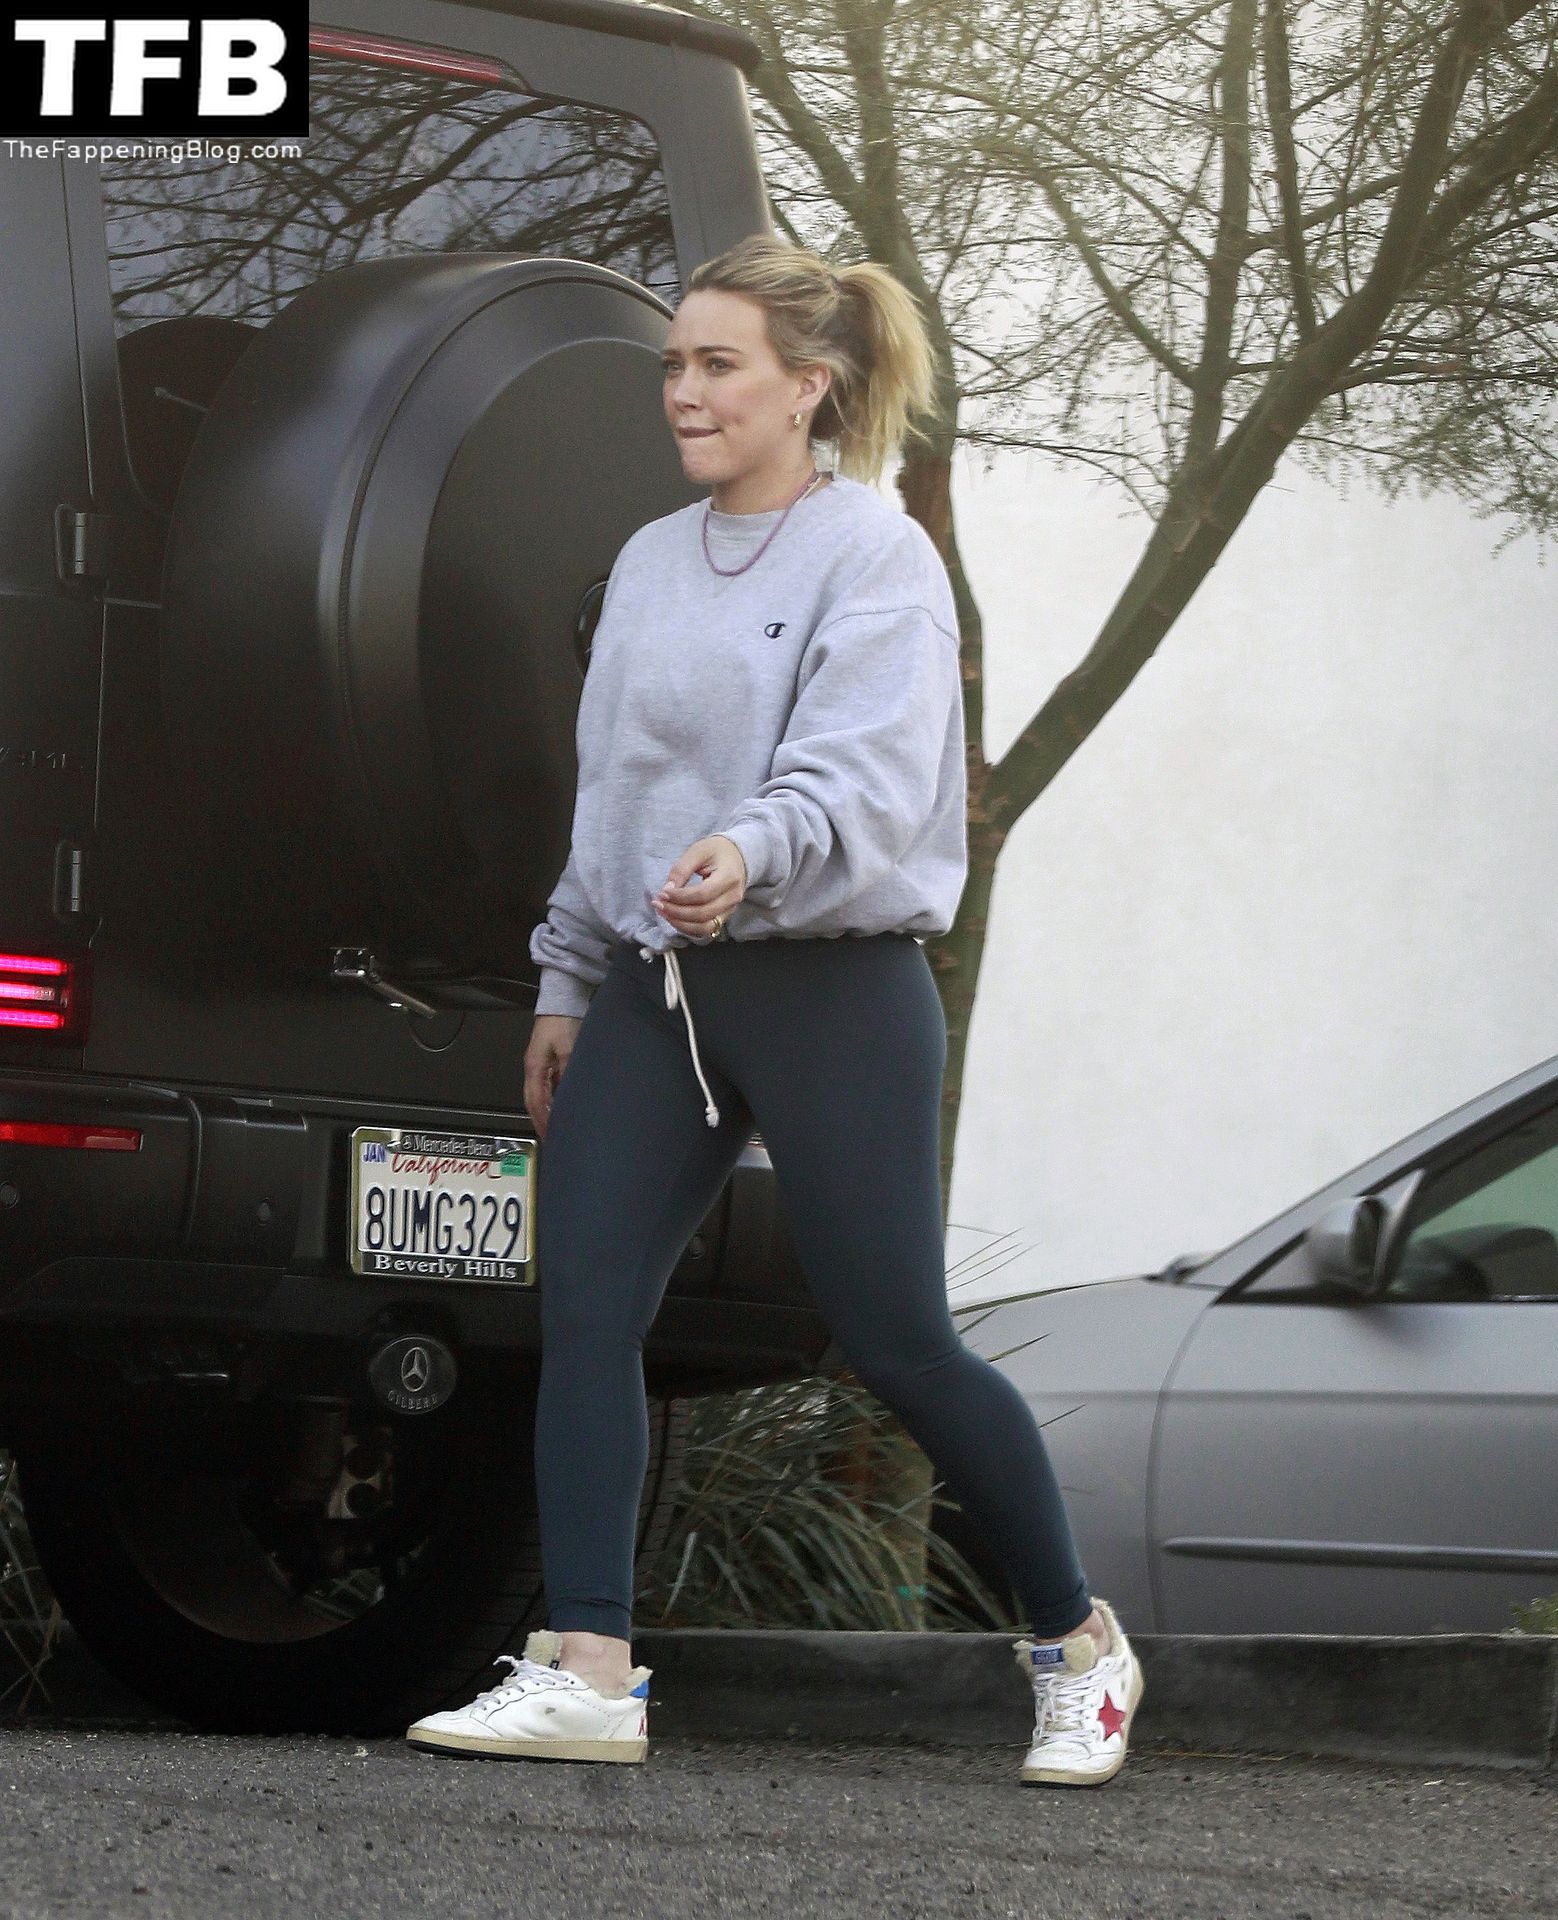 Hilary-Duff-shows-off-impressive-gym-results-in-a-pair-of-skintight-leggings-during-LA-errand-run...-one-day-after-hosting-quaint-Thanksgiving-gathering-at-her-home-The-Fappening-Blog-4.jpg